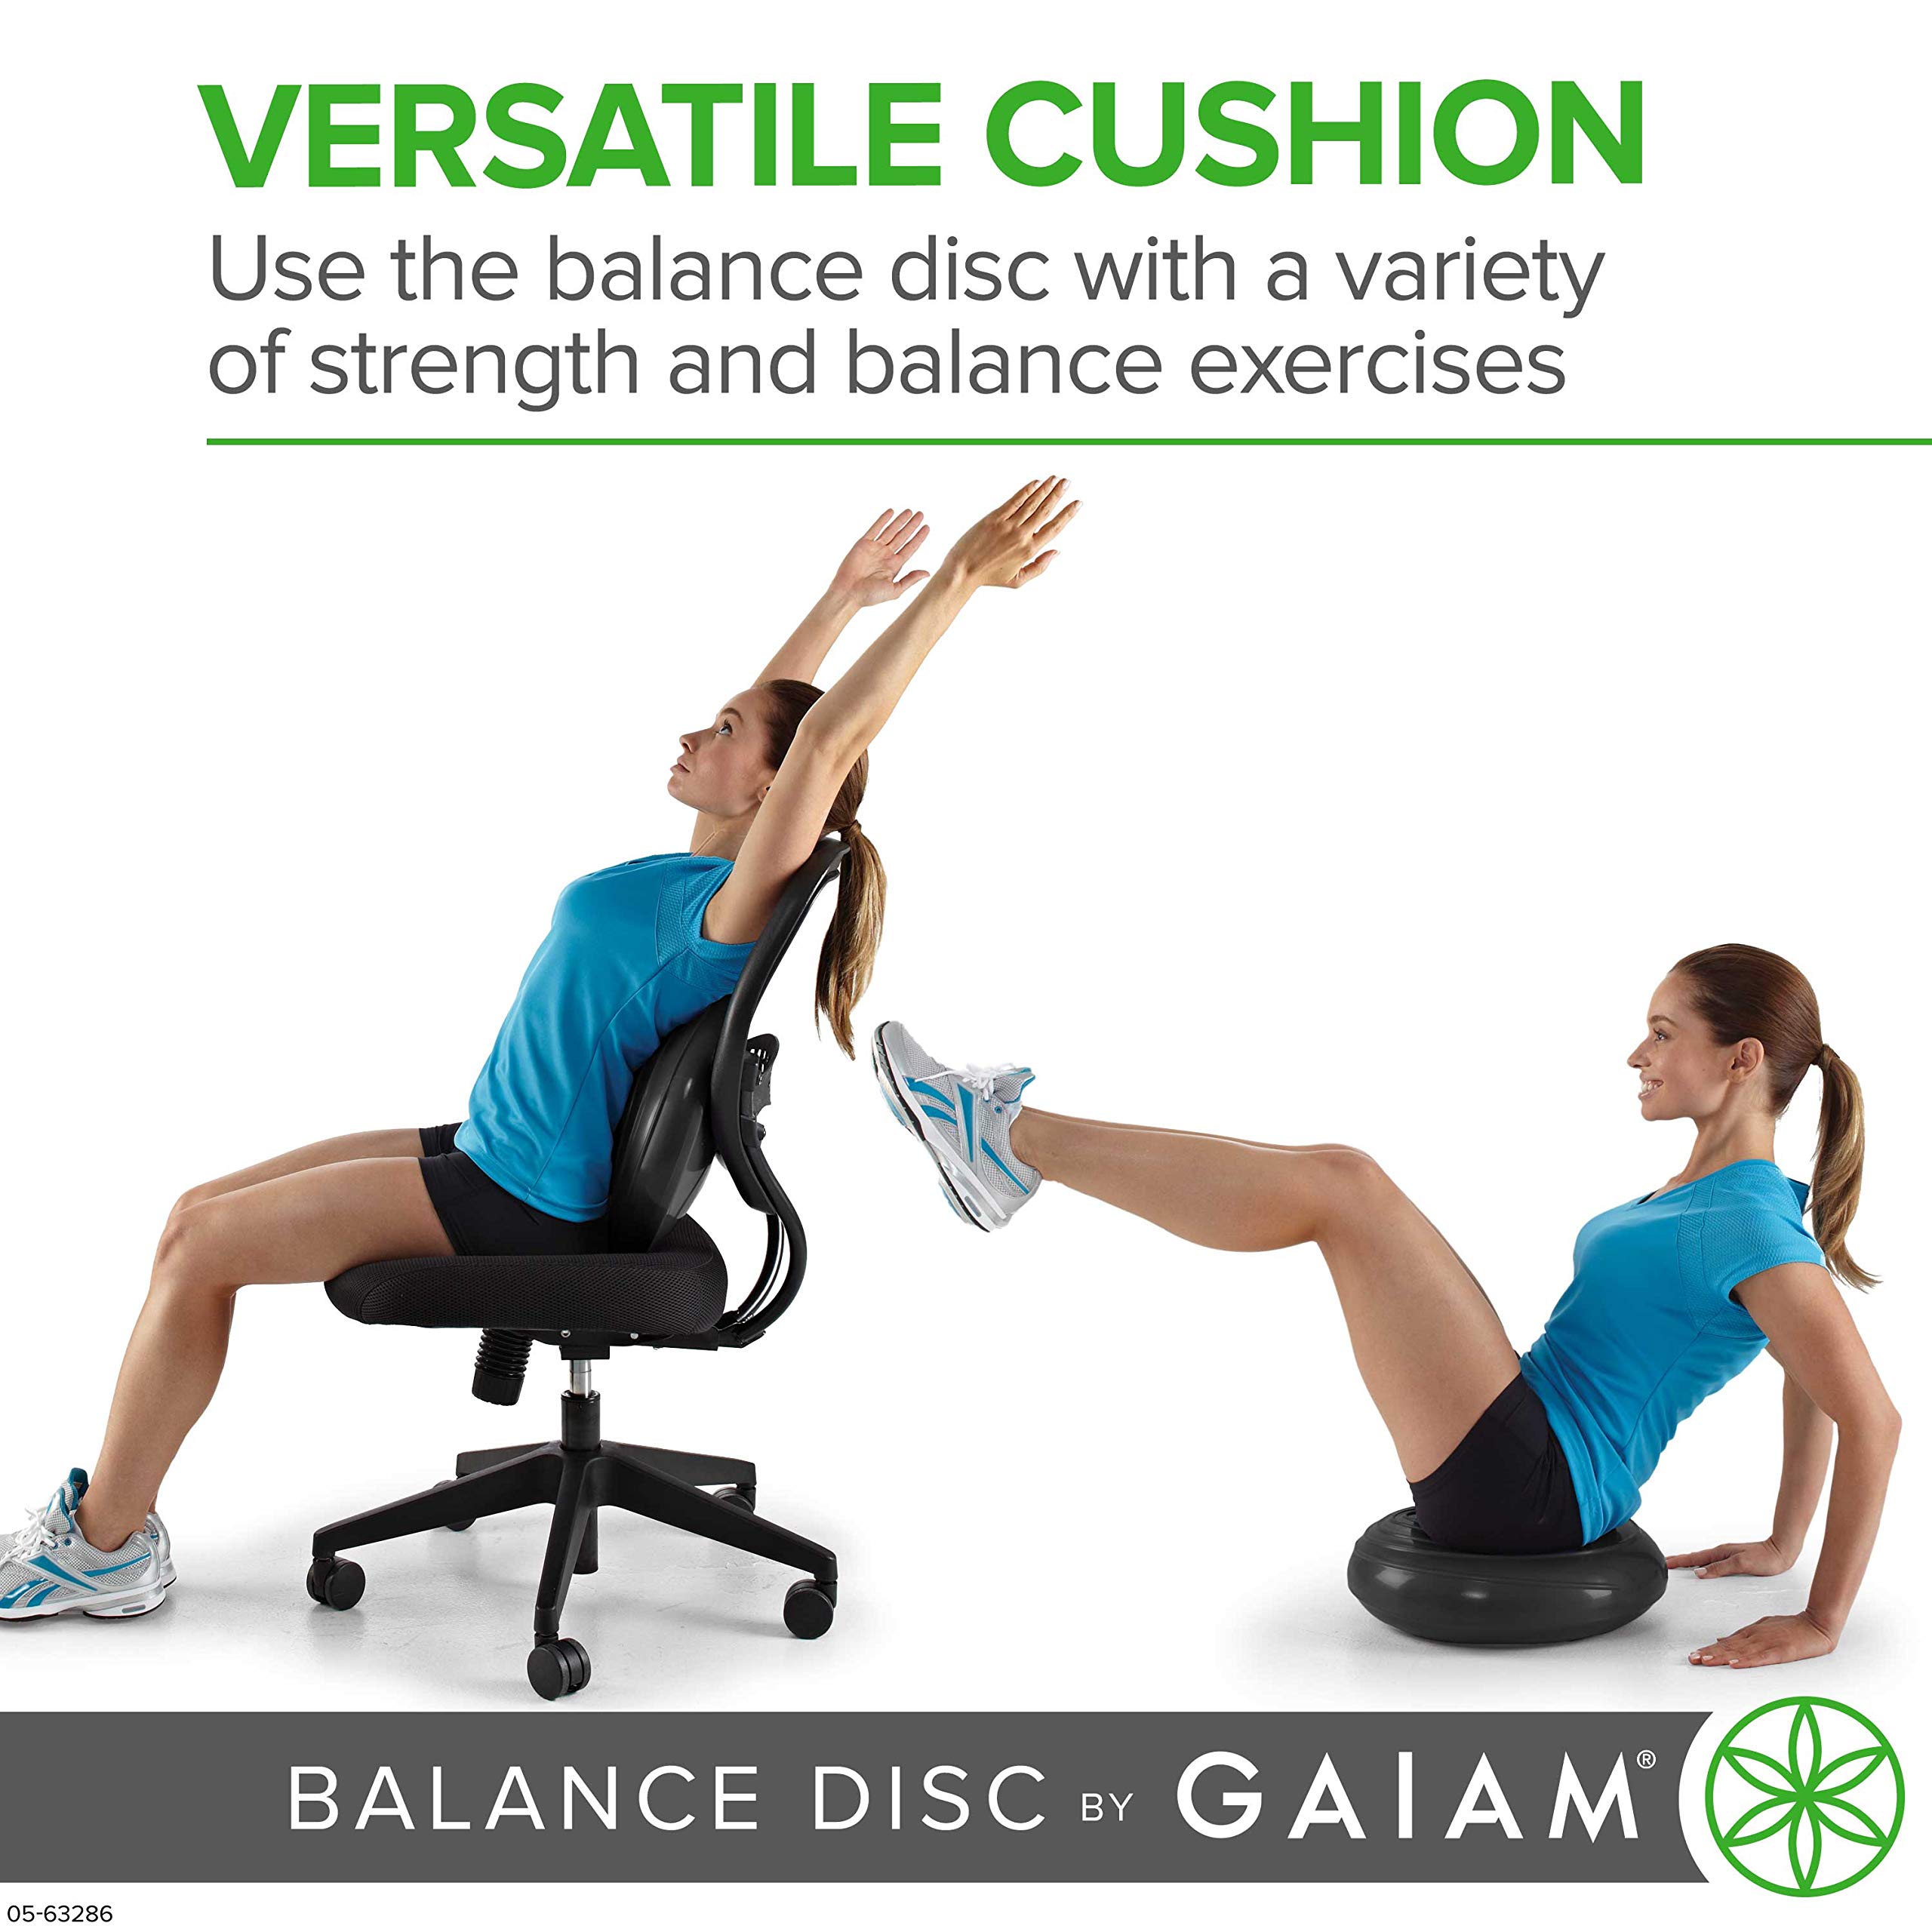 Gaiam Balance Disc Wobble Cushion Stability Core Trainer For Home Or Office Desk Chair and Kids Alternative Classroom Sensory Wi